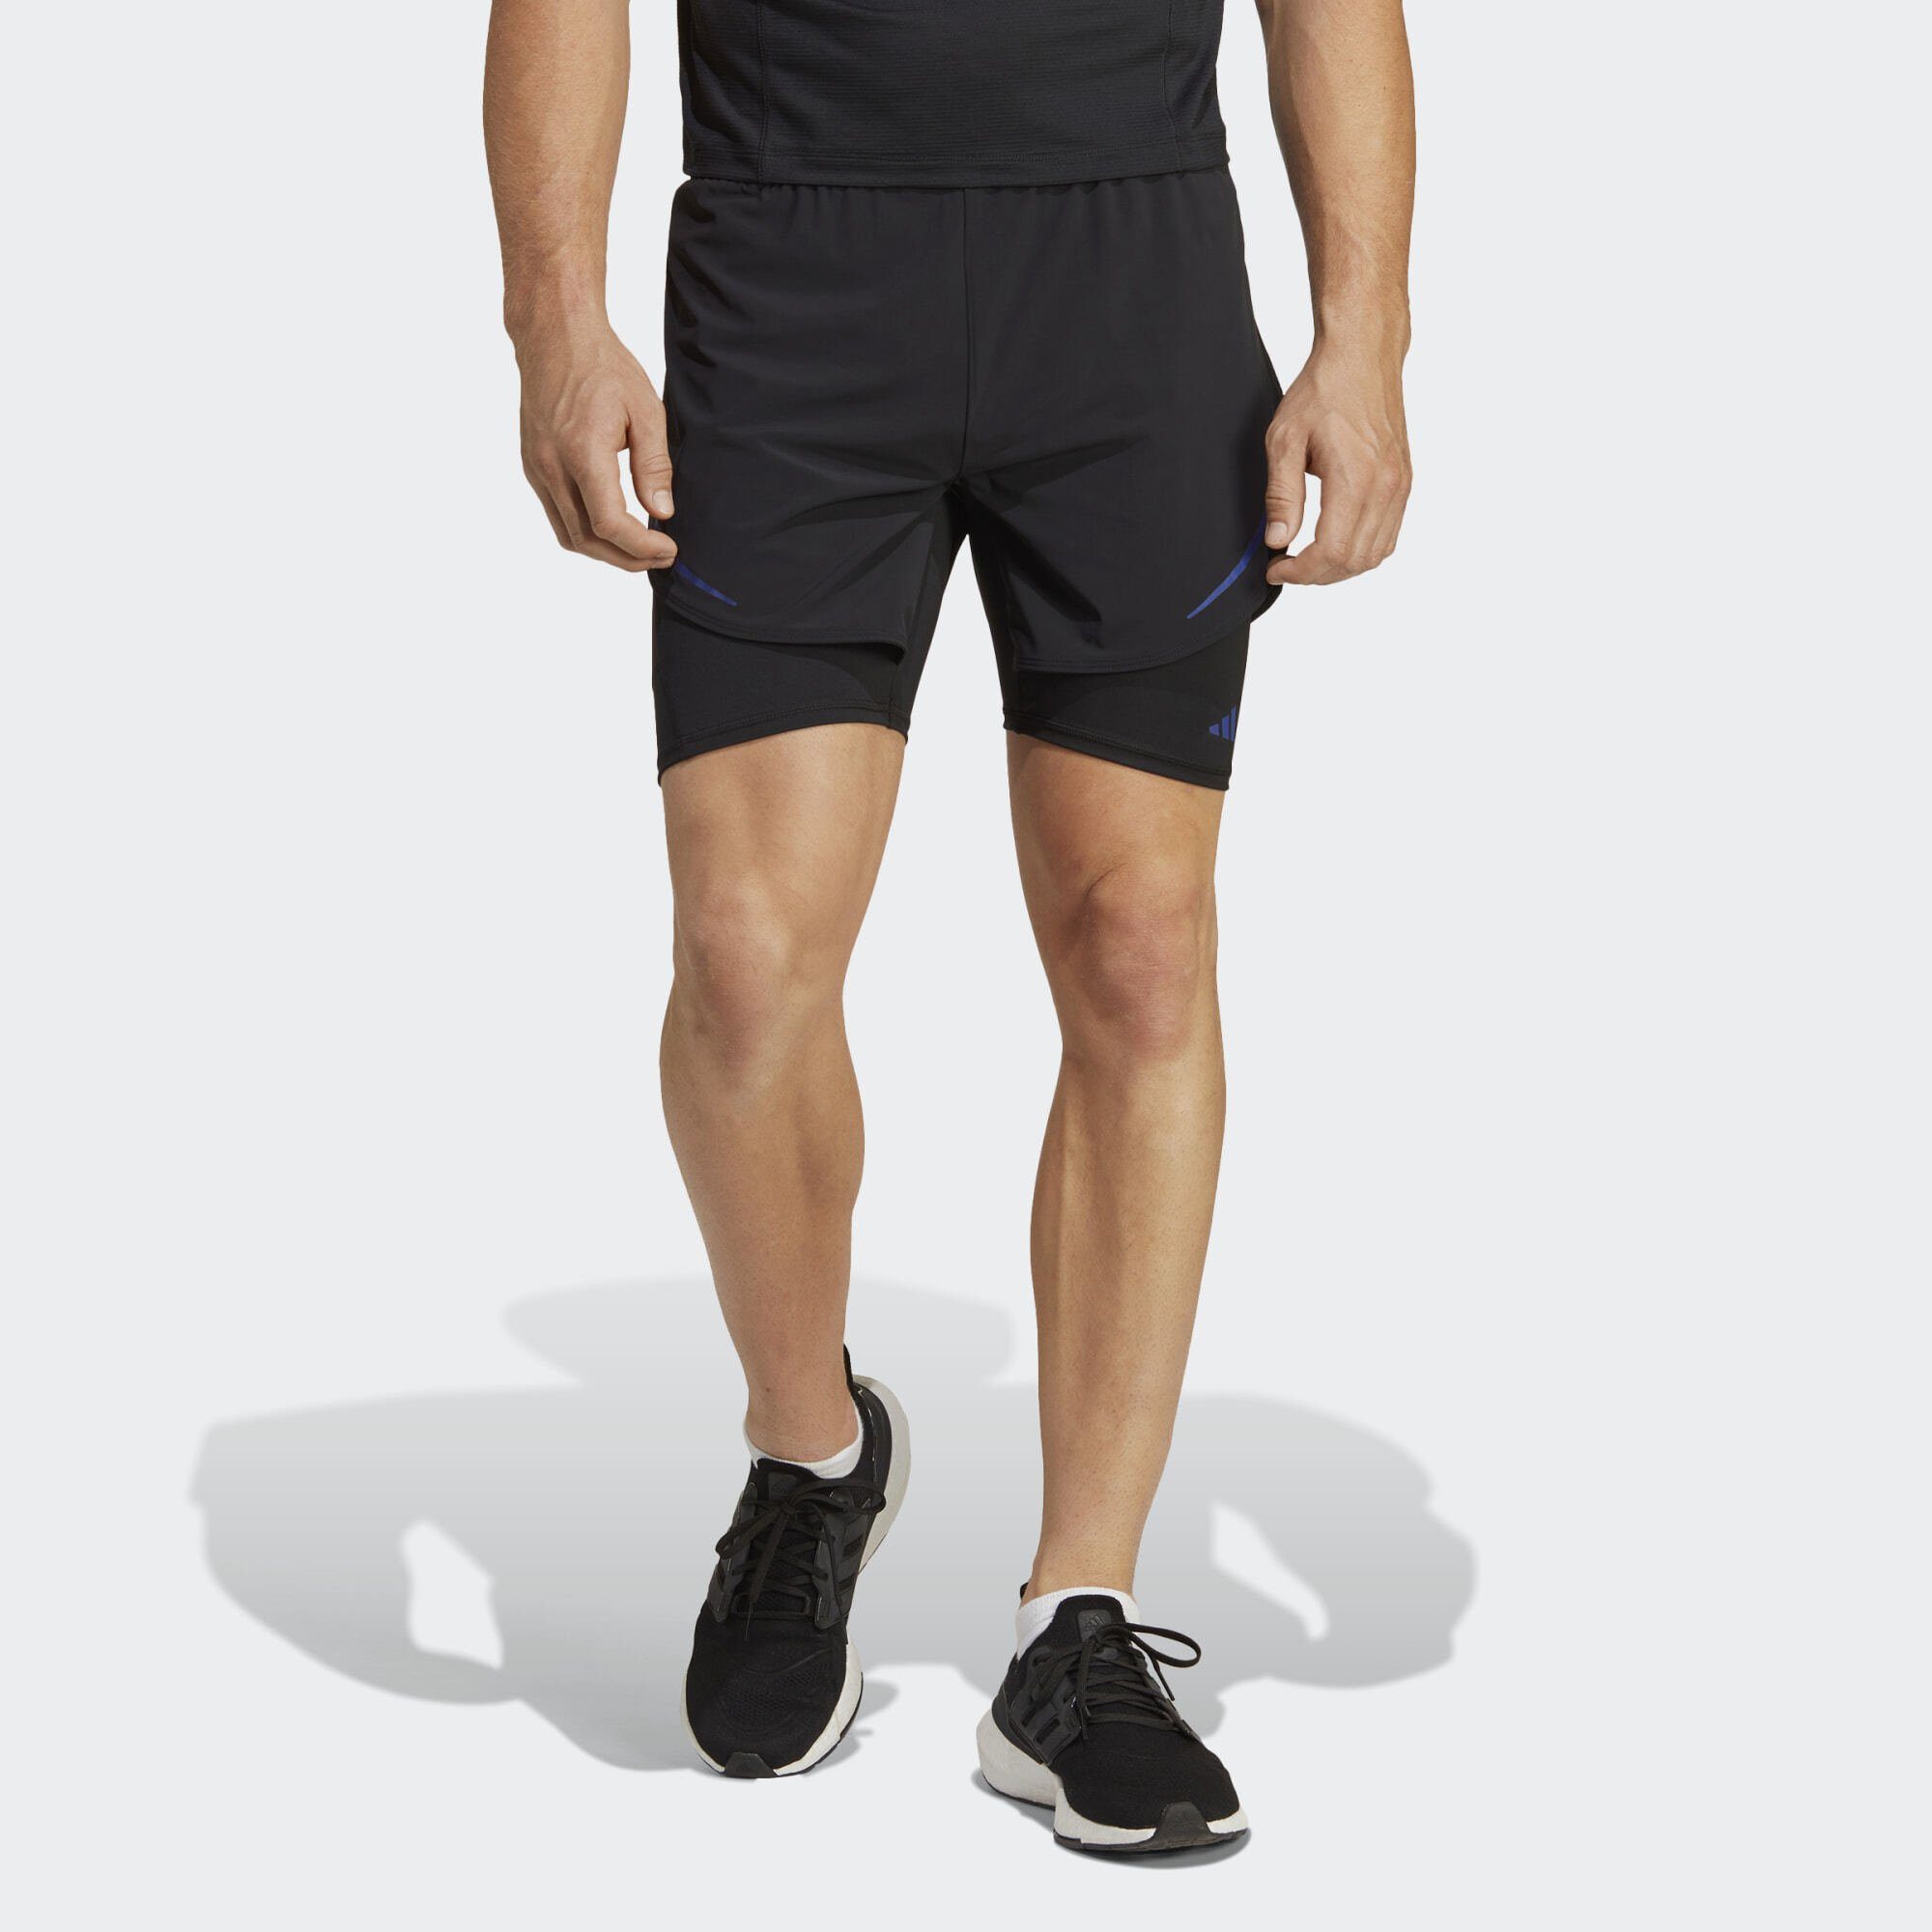 TRAINING 2-in-1-Shorts HIIT adidas 2-IN-1 Performance Black HEAT.RDY SHORTS